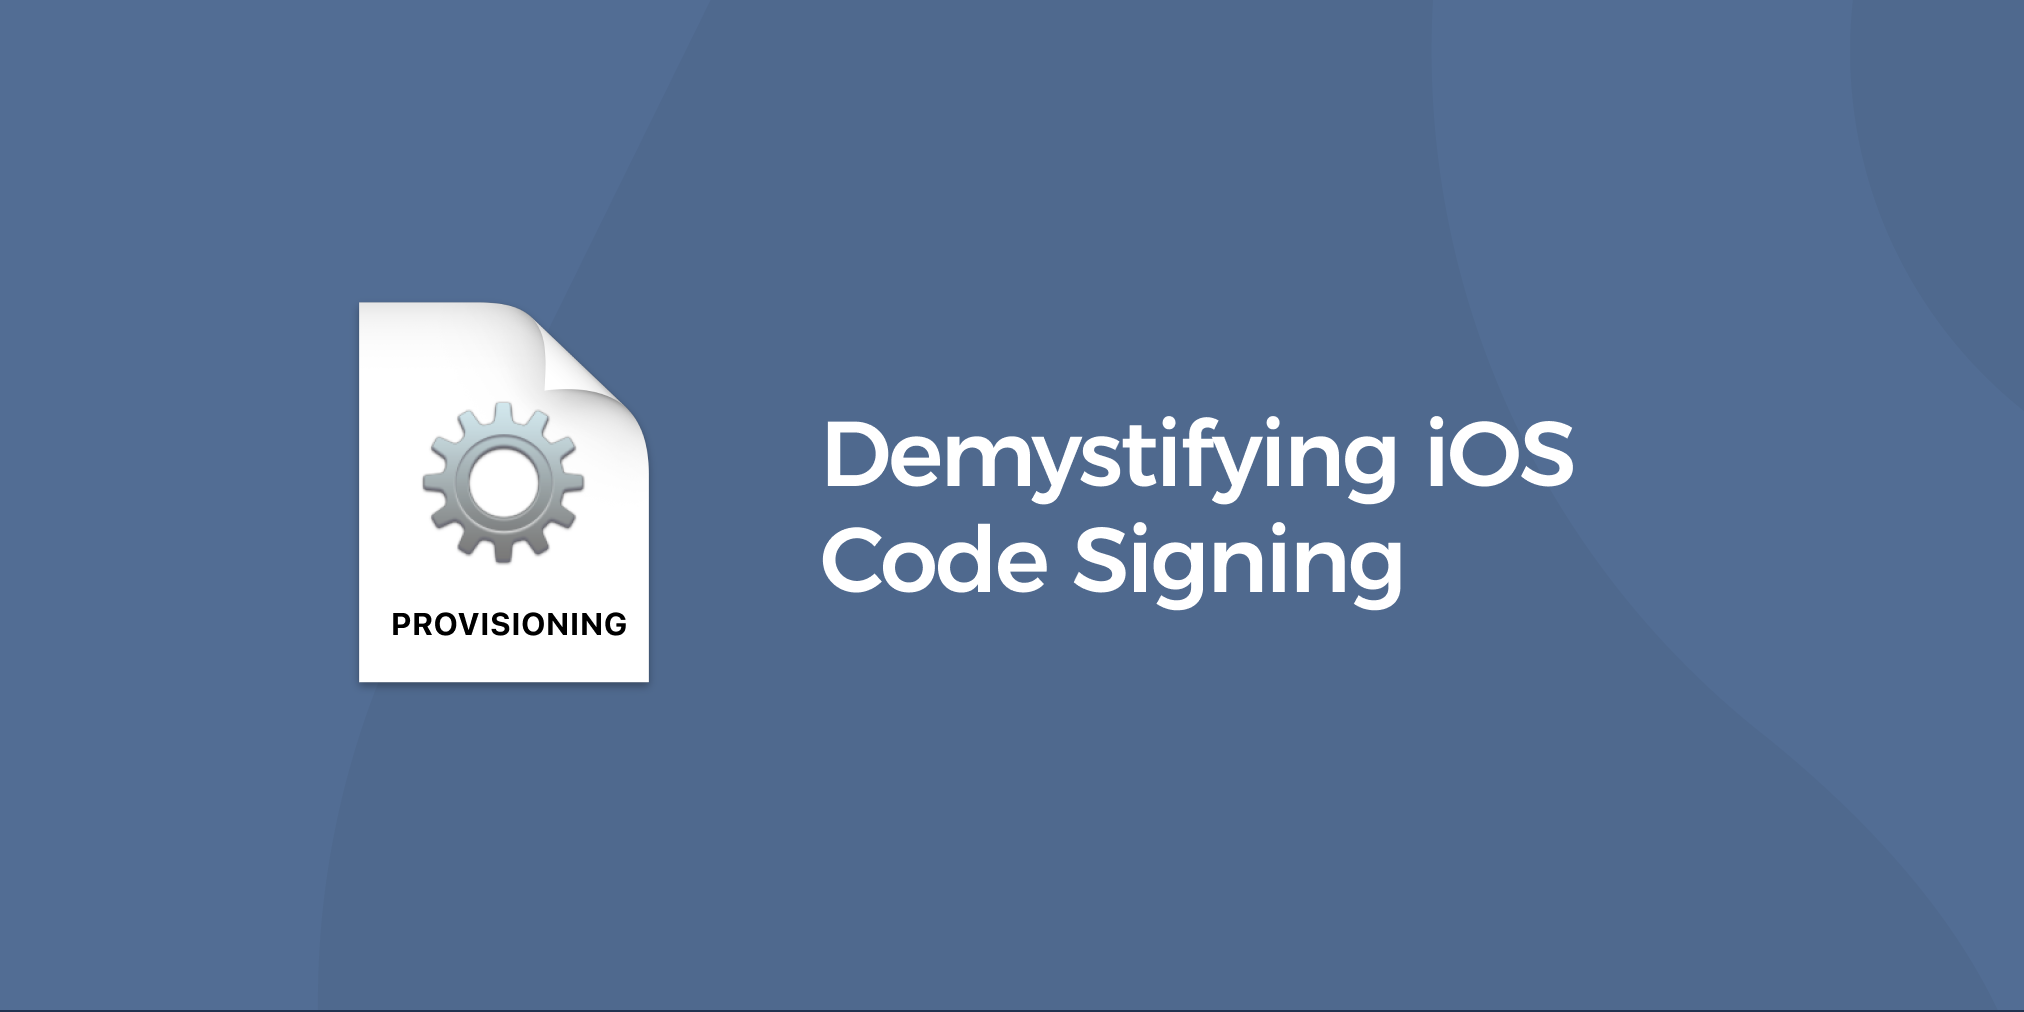 iOS Code Signing Demystified